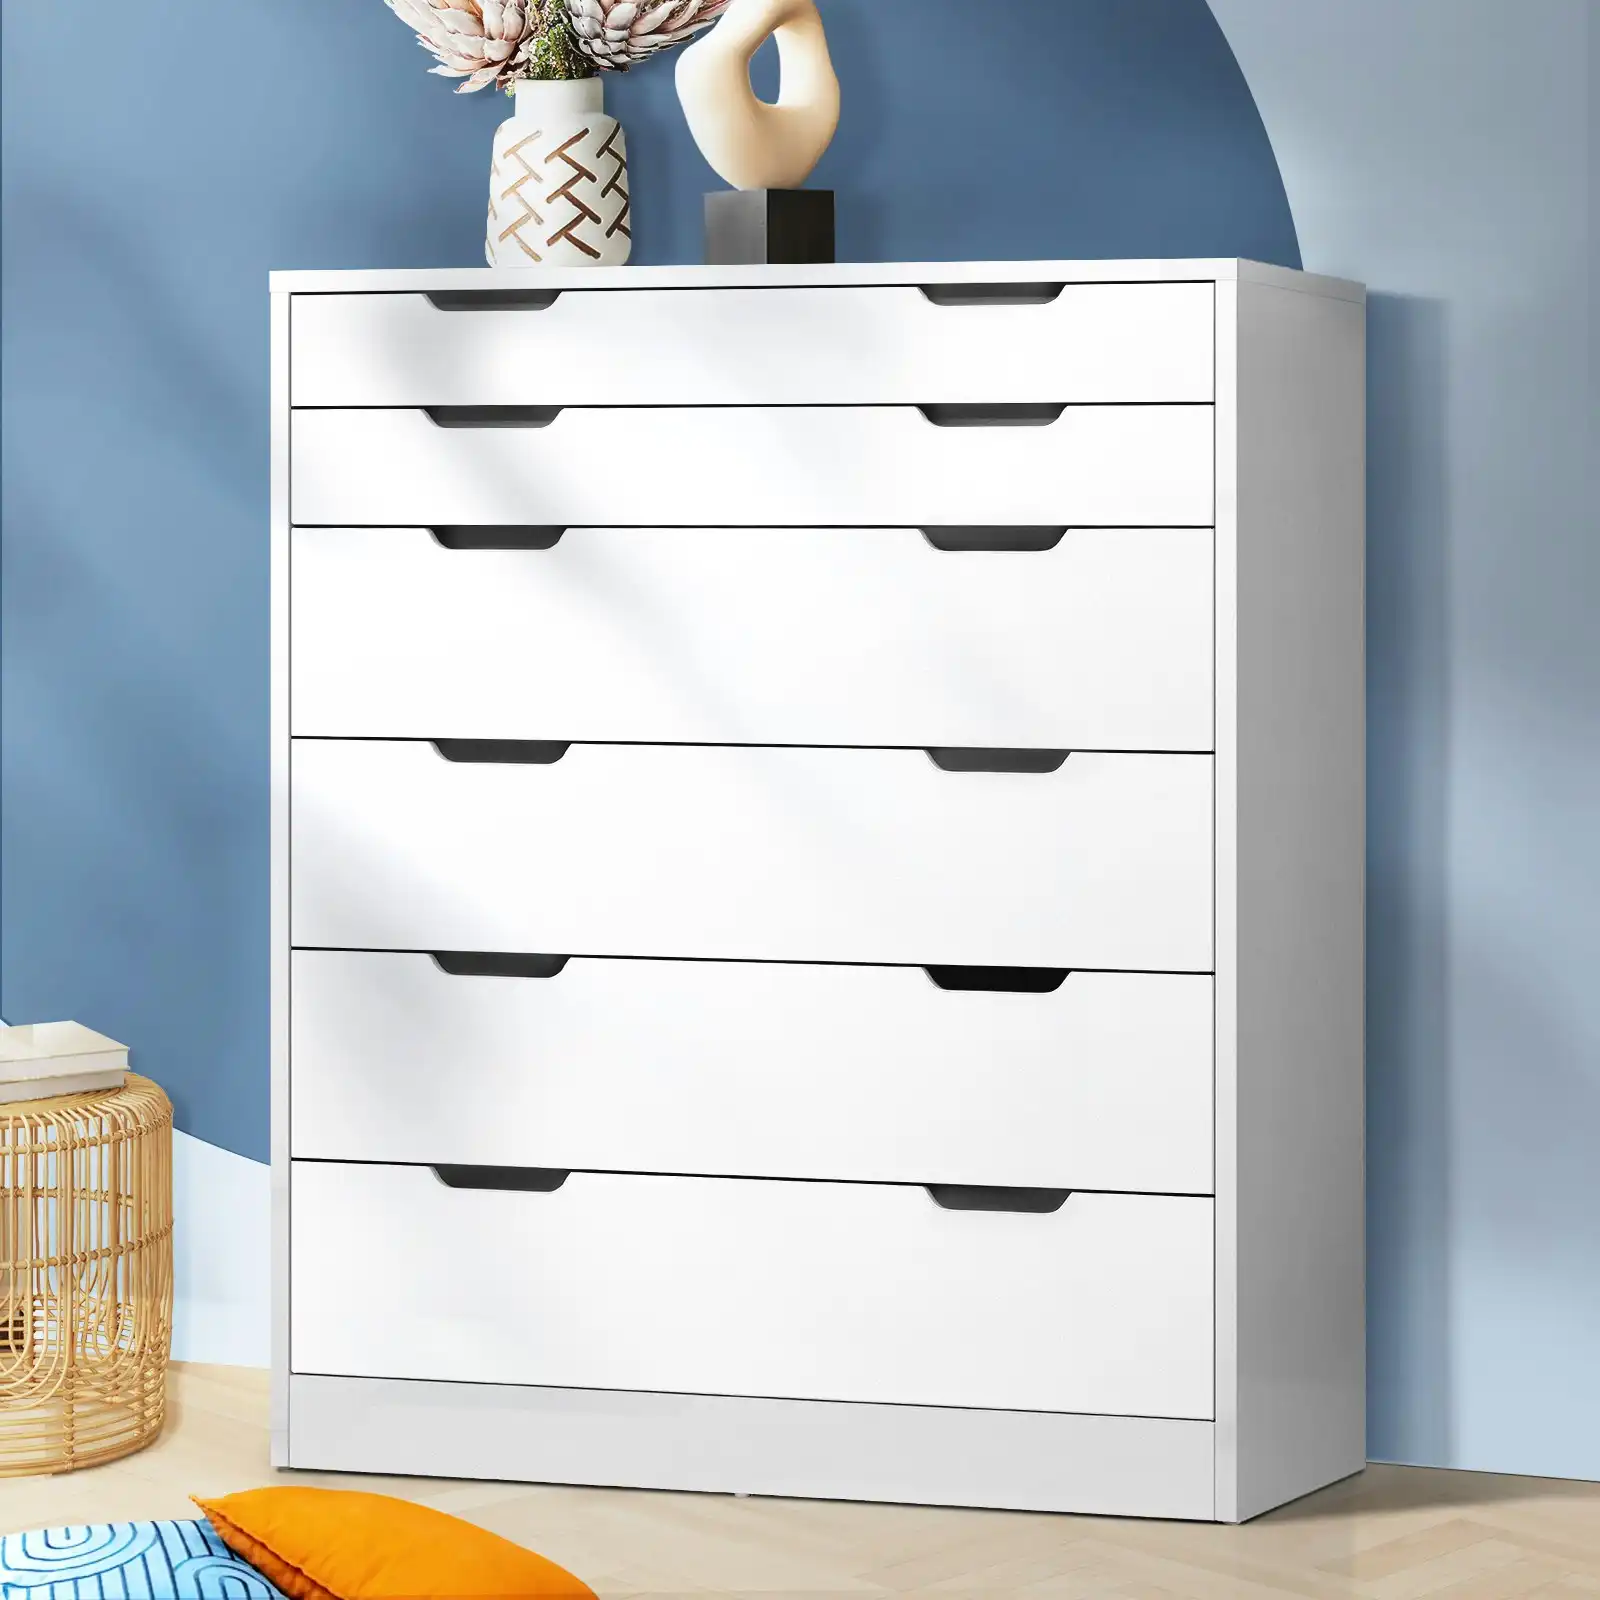 Oikiture 6 Chest of Drawers Tallboy Storage Cabinet Dresser Bedroom White